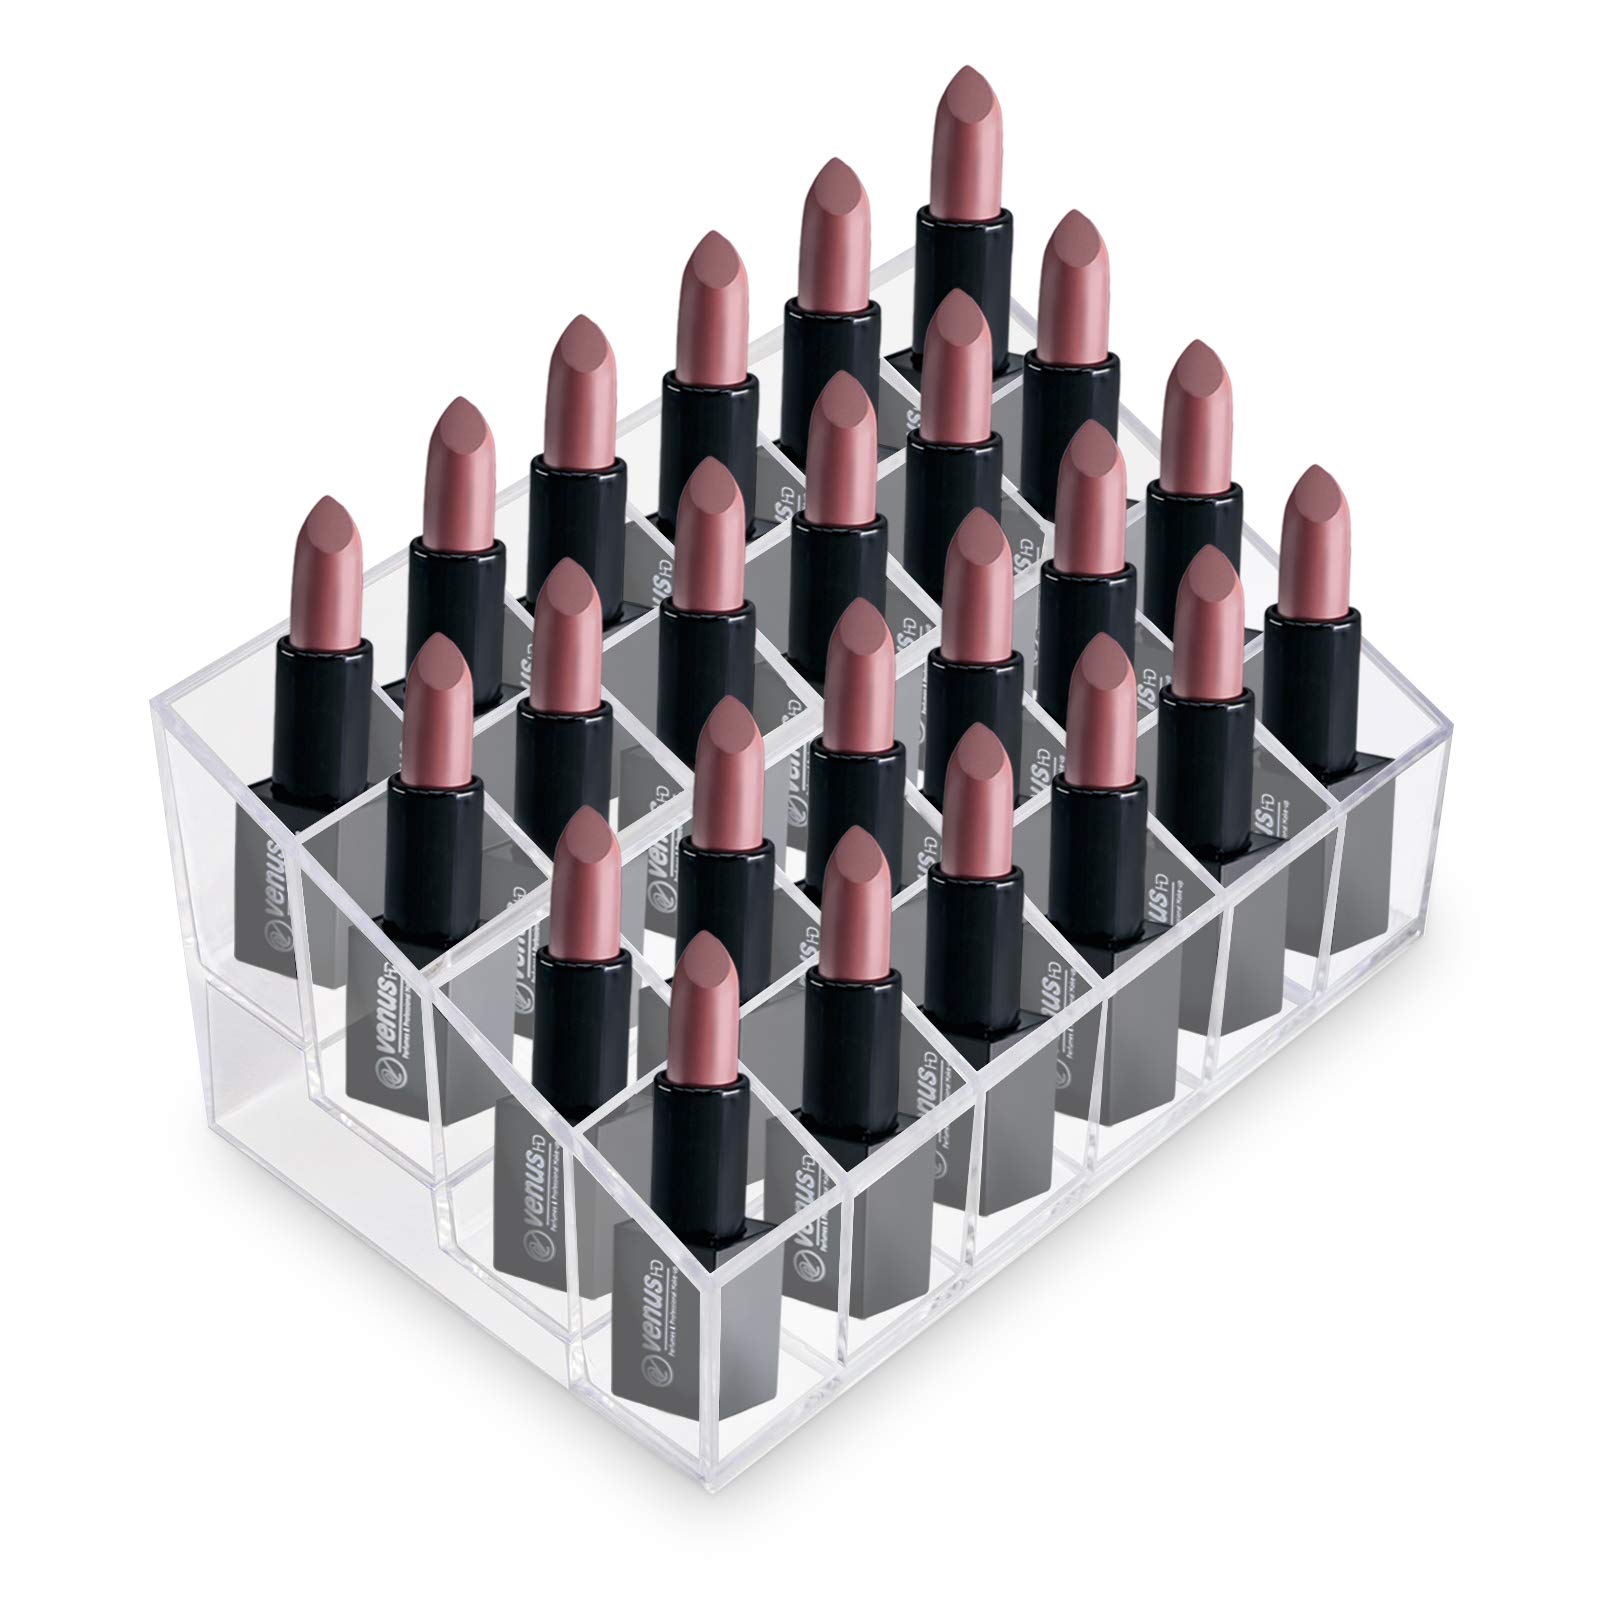 Transparent Cosmetic Makeup Organizer for Lipstick, Brushes, Bottles, and More. Clear Case Display Rack Holder